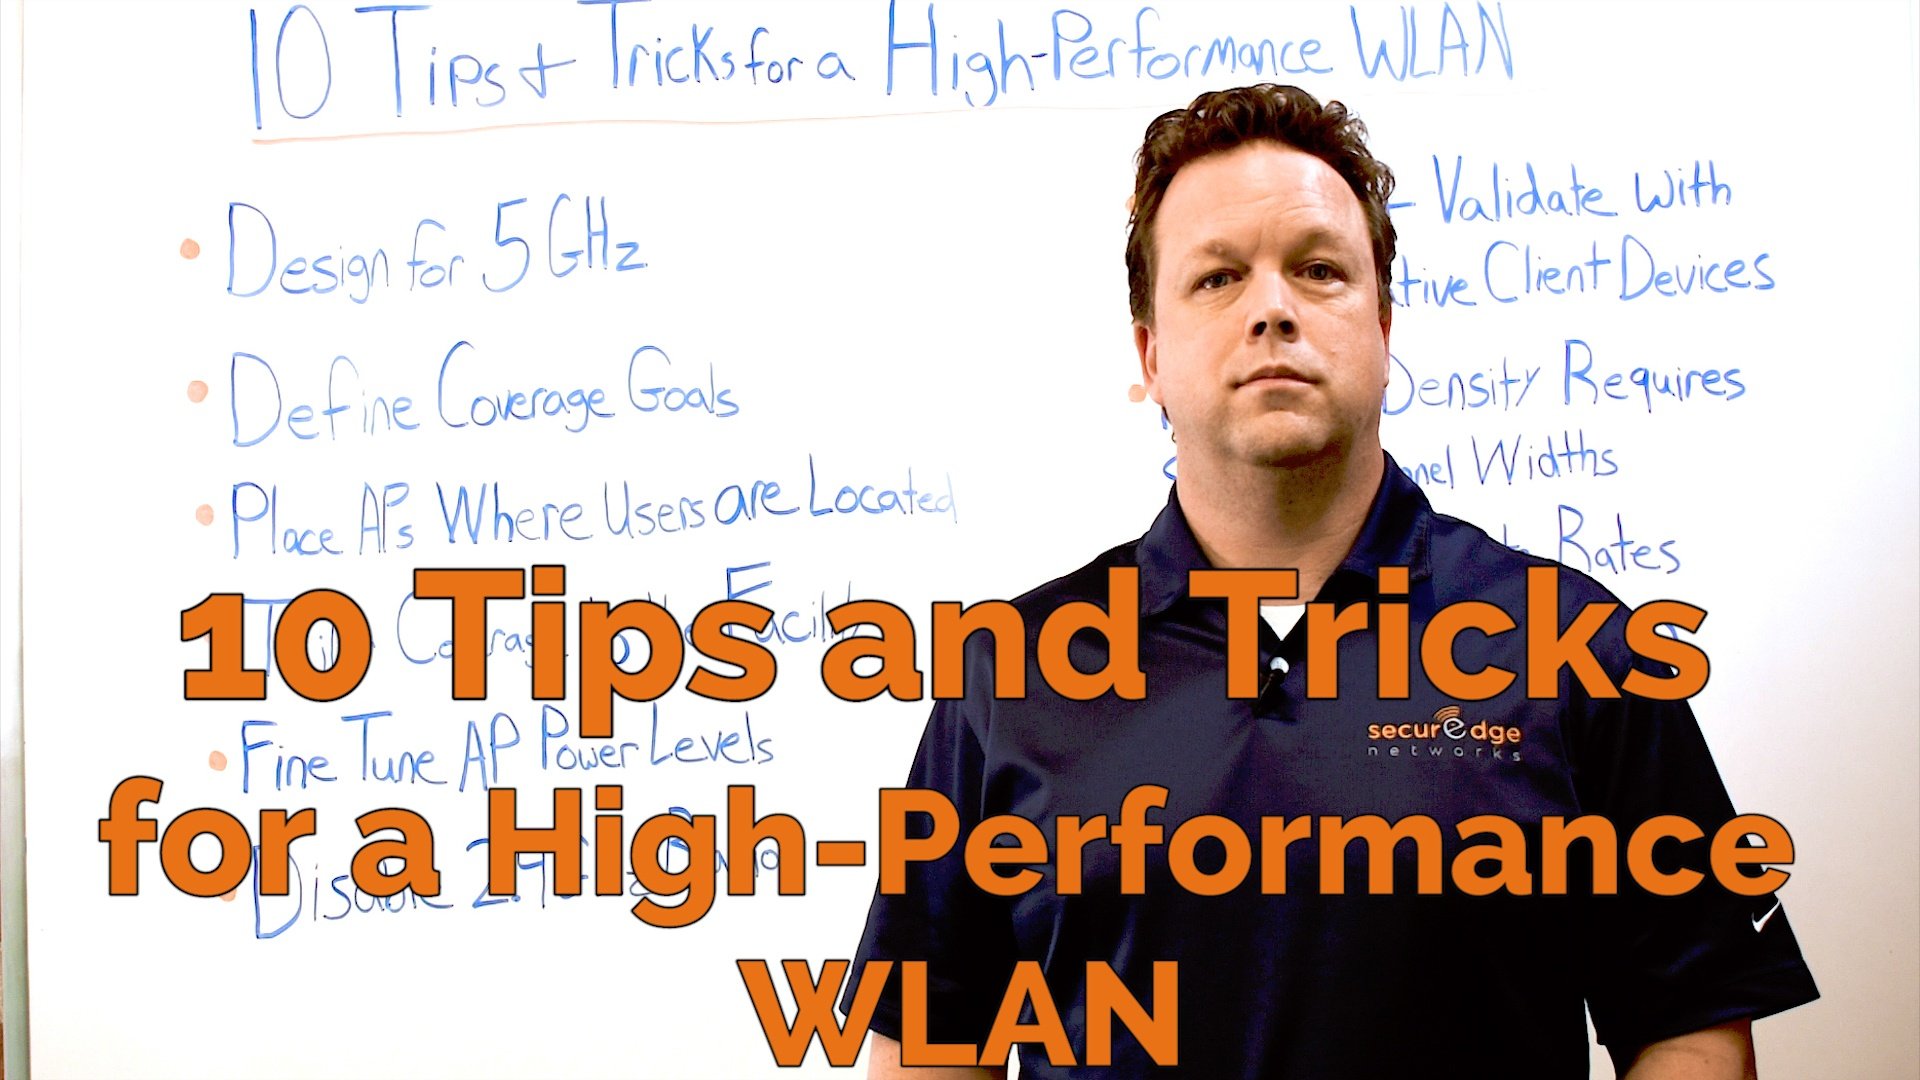 Wireless Network Design: 10 Tips and Tricks for a High-Performance WLAN